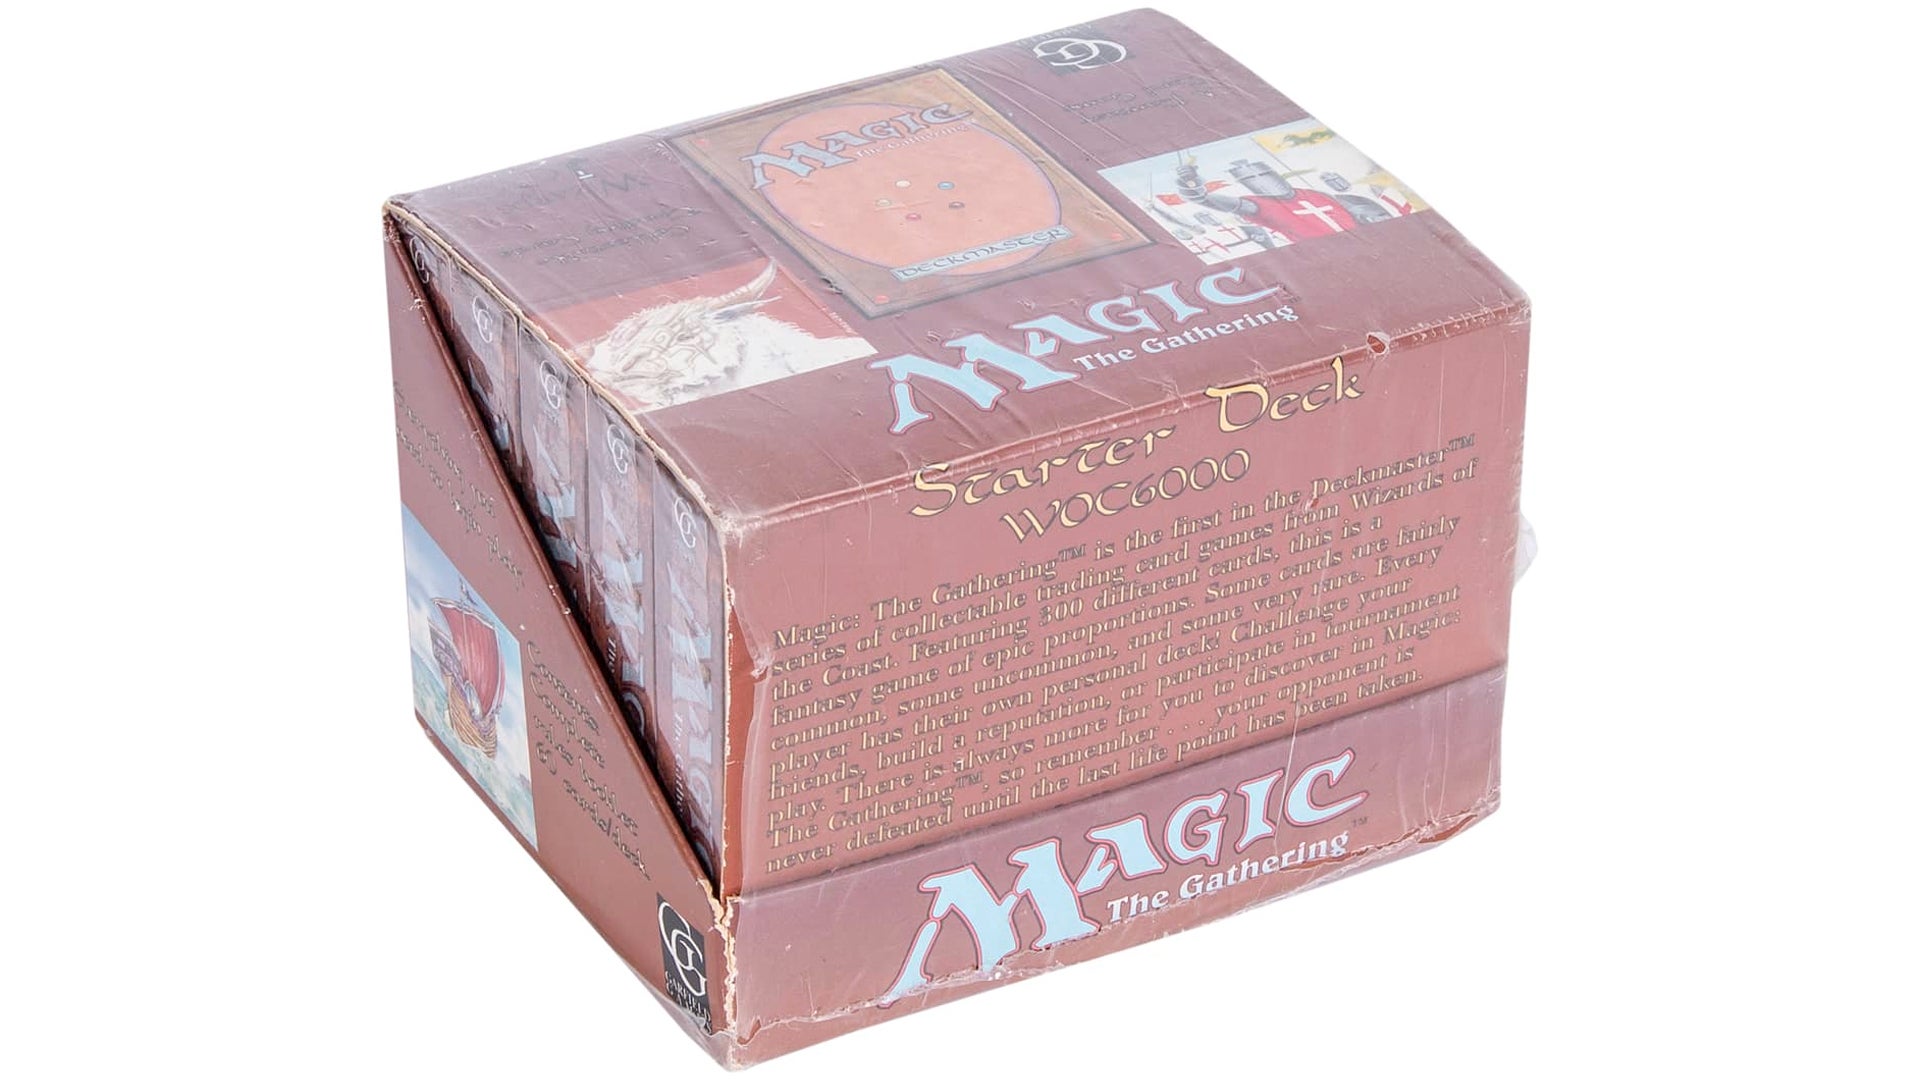 Image for Magic: The Gathering Beta Edition starter decks - potentially including a Black Lotus - go under the hammer for $250,000